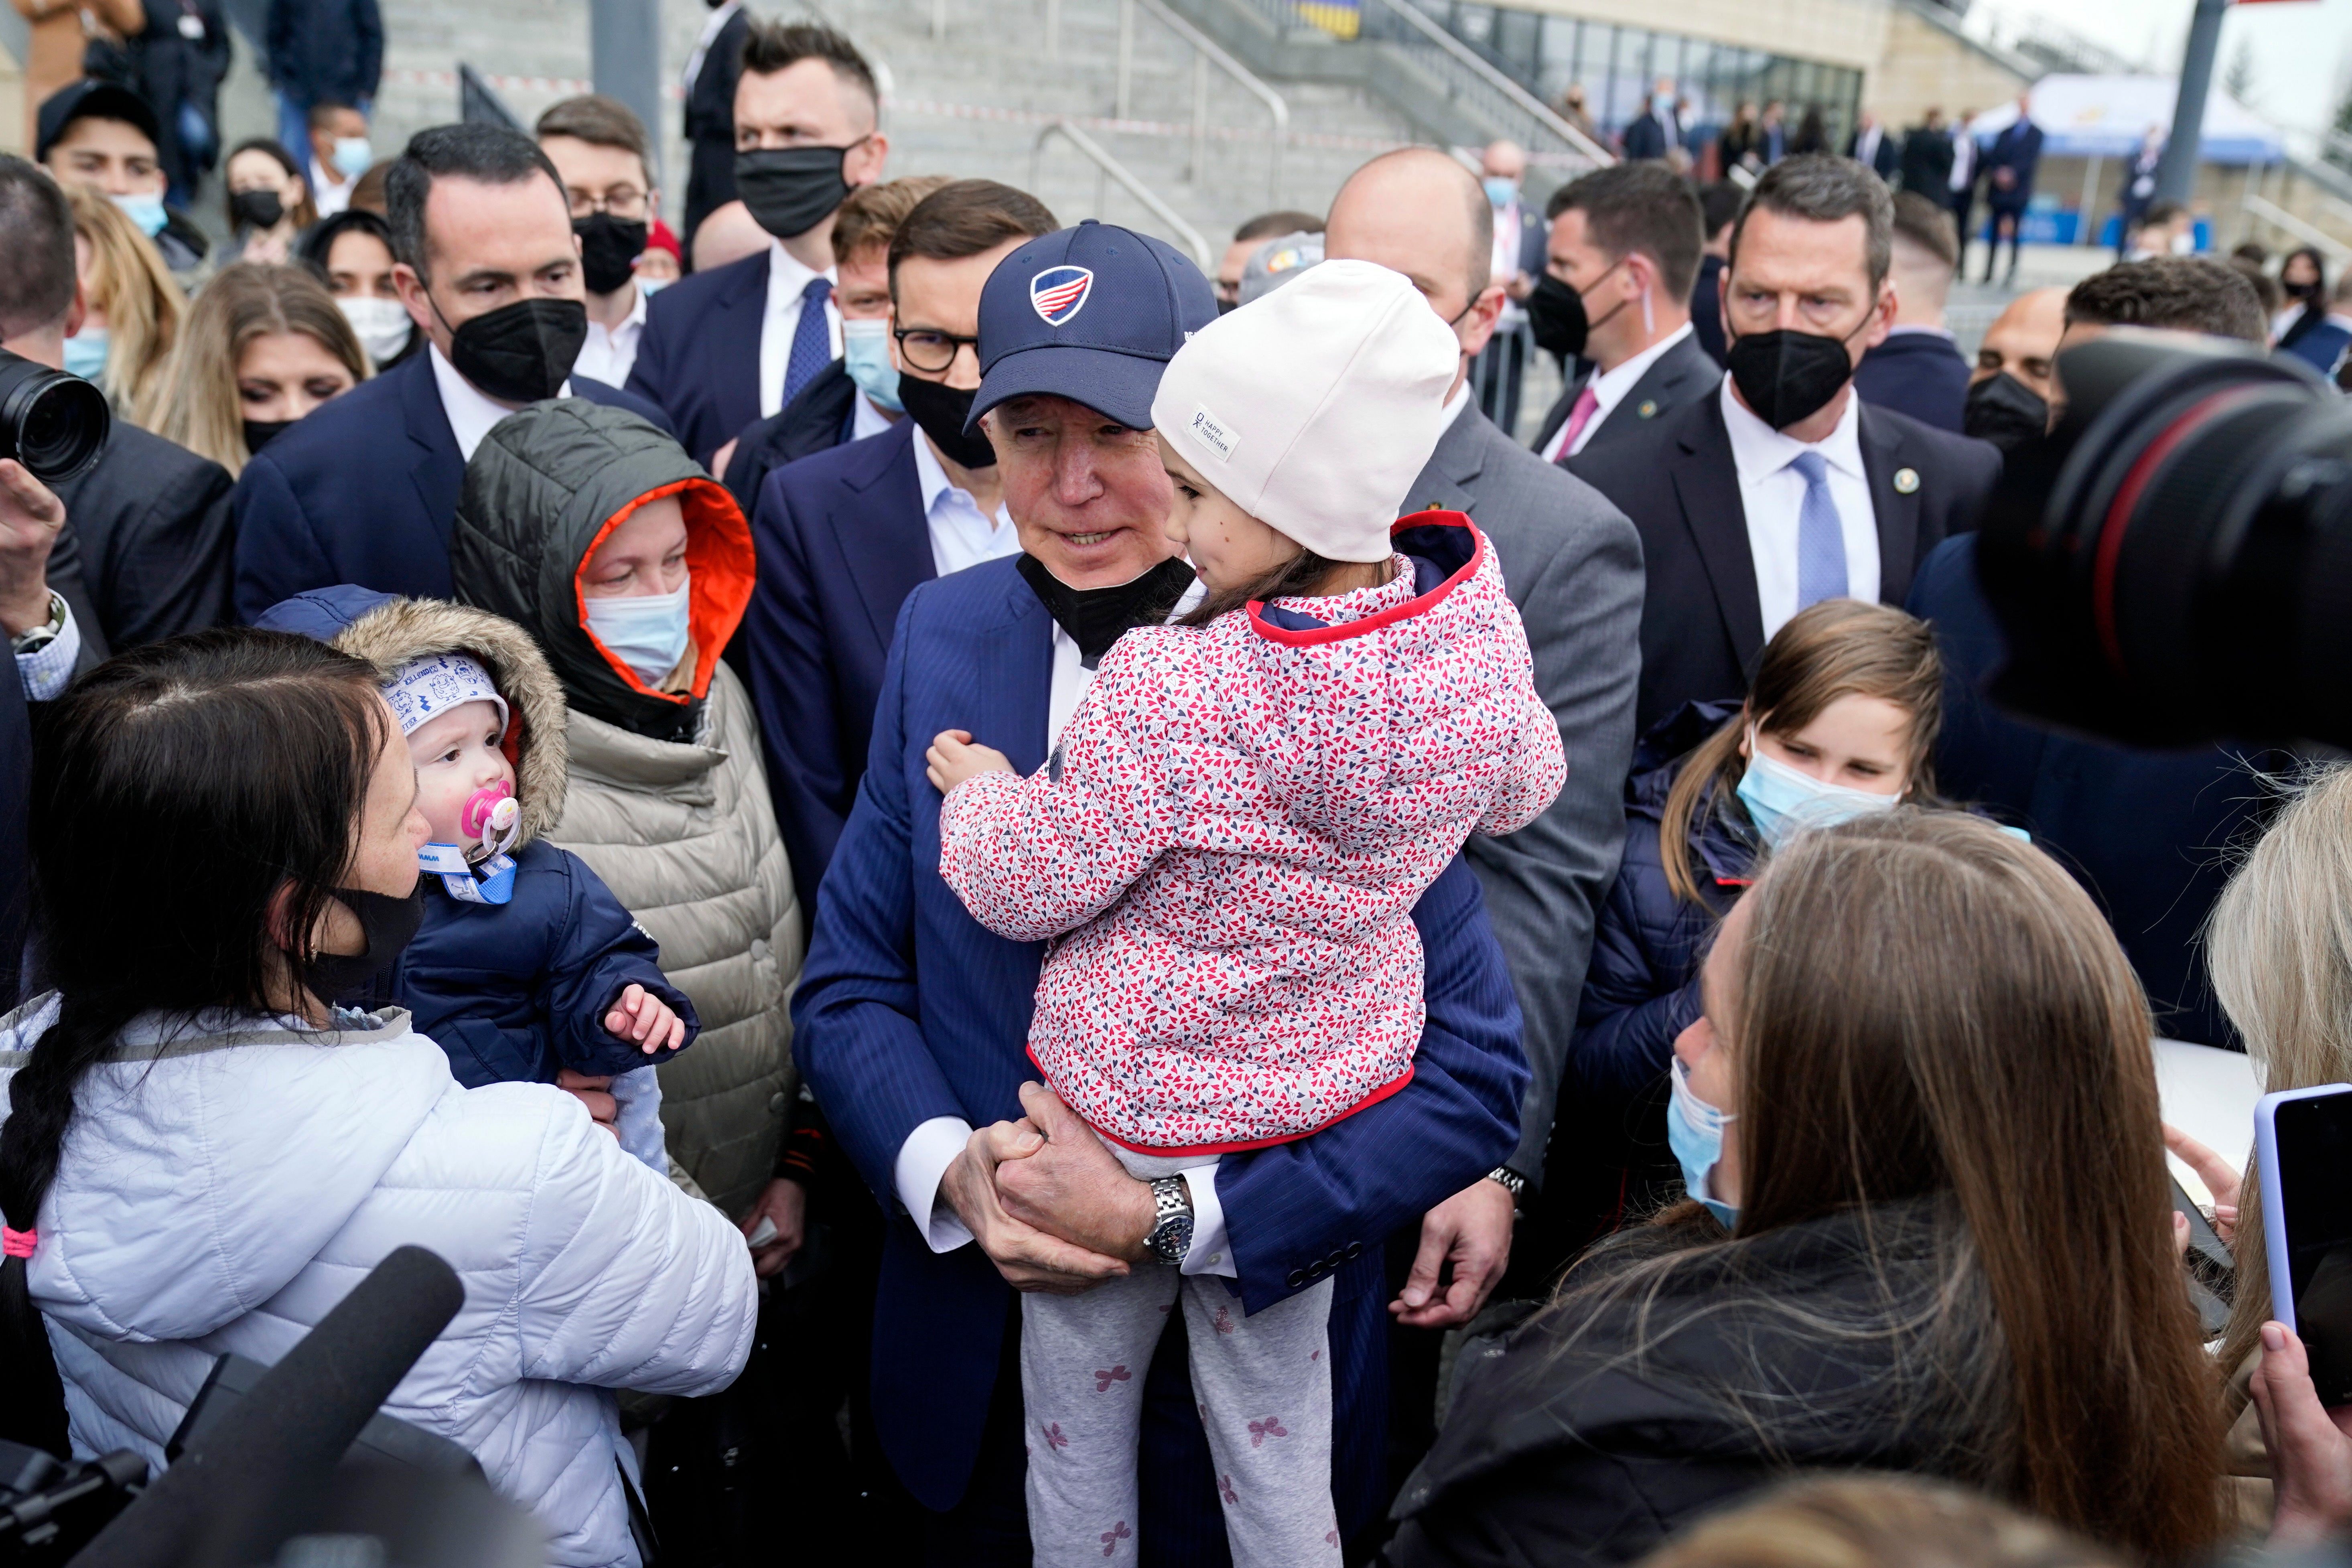 President Joe Biden met with Ukrainian refugees and humanitarian aid workers during a visit to PGE Narodowy Stadium on Saturday